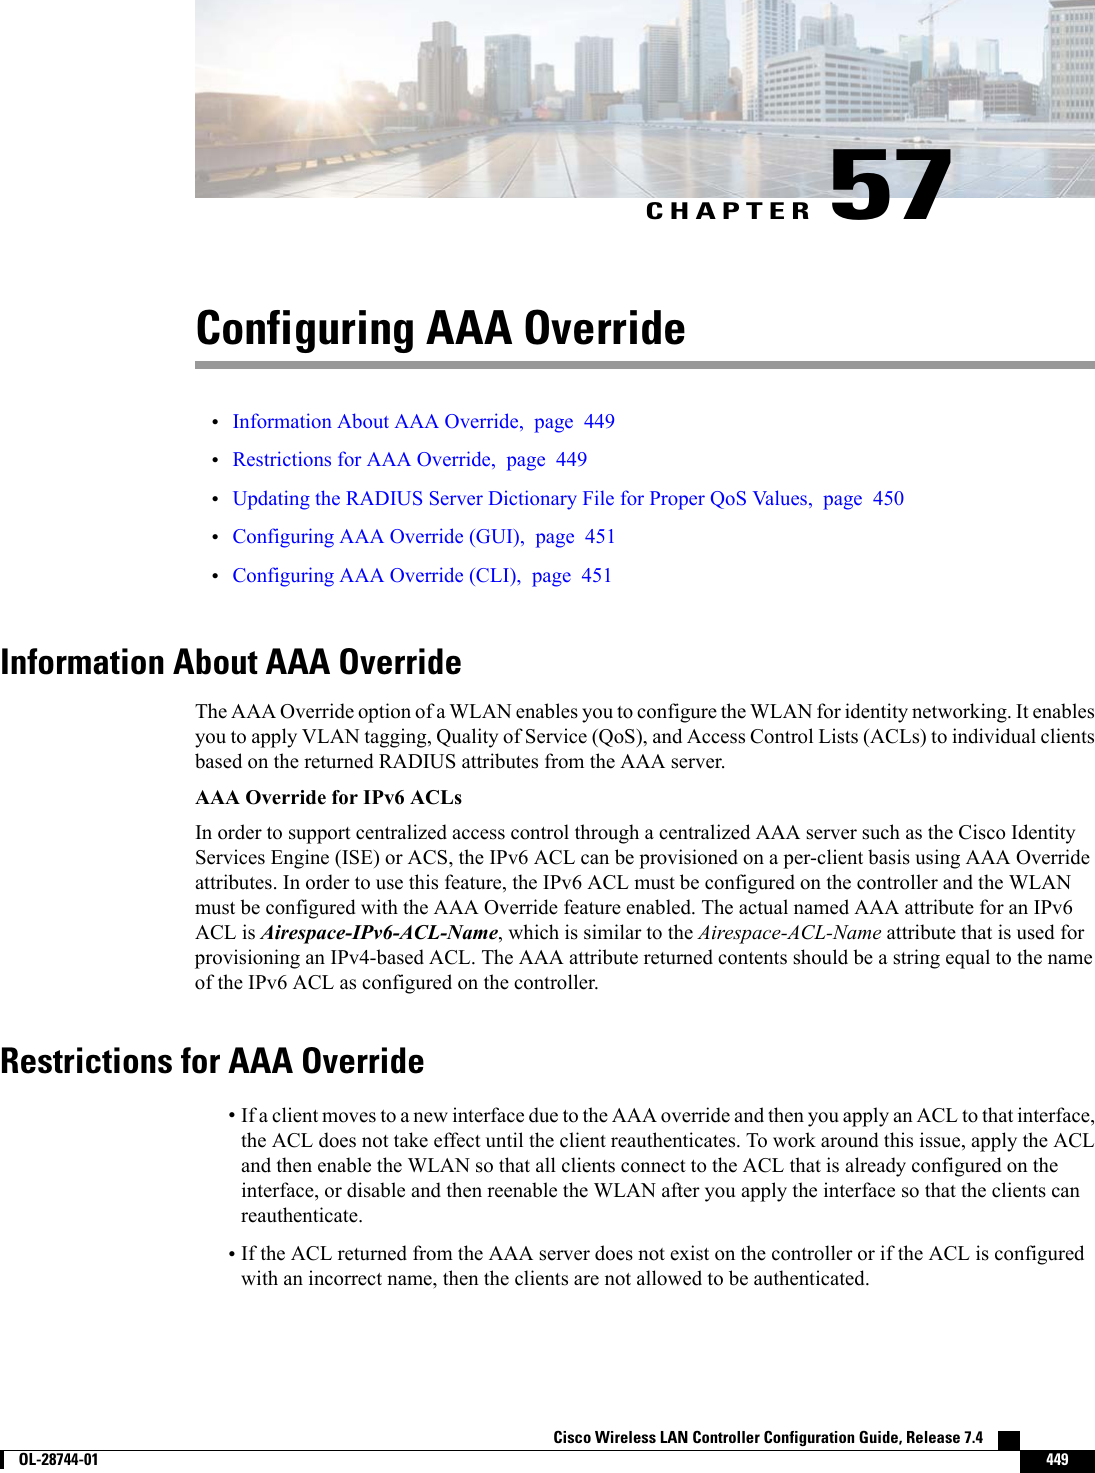 CHAPTER 57Configuring AAA Override•Information About AAA Override, page 449•Restrictions for AAA Override, page 449•Updating the RADIUS Server Dictionary File for Proper QoS Values, page 450•Configuring AAA Override (GUI), page 451•Configuring AAA Override (CLI), page 451Information About AAA OverrideThe AAA Override option of a WLAN enables you to configure the WLAN for identity networking. It enablesyou to apply VLAN tagging, Quality of Service (QoS), and Access Control Lists (ACLs) to individual clientsbased on the returned RADIUS attributes from the AAA server.AAA Override for IPv6 ACLsIn order to support centralized access control through a centralized AAA server such as the Cisco IdentityServices Engine (ISE) or ACS, the IPv6 ACL can be provisioned on a per-client basis using AAA Overrideattributes. In order to use this feature, the IPv6 ACL must be configured on the controller and the WLANmust be configured with the AAA Override feature enabled. The actual named AAA attribute for an IPv6ACL is Airespace-IPv6-ACL-Name, which is similar to the Airespace-ACL-Name attribute that is used forprovisioning an IPv4-based ACL. The AAA attribute returned contents should be a string equal to the nameof the IPv6 ACL as configured on the controller.Restrictions for AAA Override•If a client moves to a new interface due to the AAA override and then you apply an ACL to that interface,the ACL does not take effect until the client reauthenticates. To work around this issue, apply the ACLand then enable the WLAN so that all clients connect to the ACL that is already configured on theinterface, or disable and then reenable the WLAN after you apply the interface so that the clients canreauthenticate.•If the ACL returned from the AAA server does not exist on the controller or if the ACL is configuredwith an incorrect name, then the clients are not allowed to be authenticated.Cisco Wireless LAN Controller Configuration Guide, Release 7.4        OL-28744-01 449